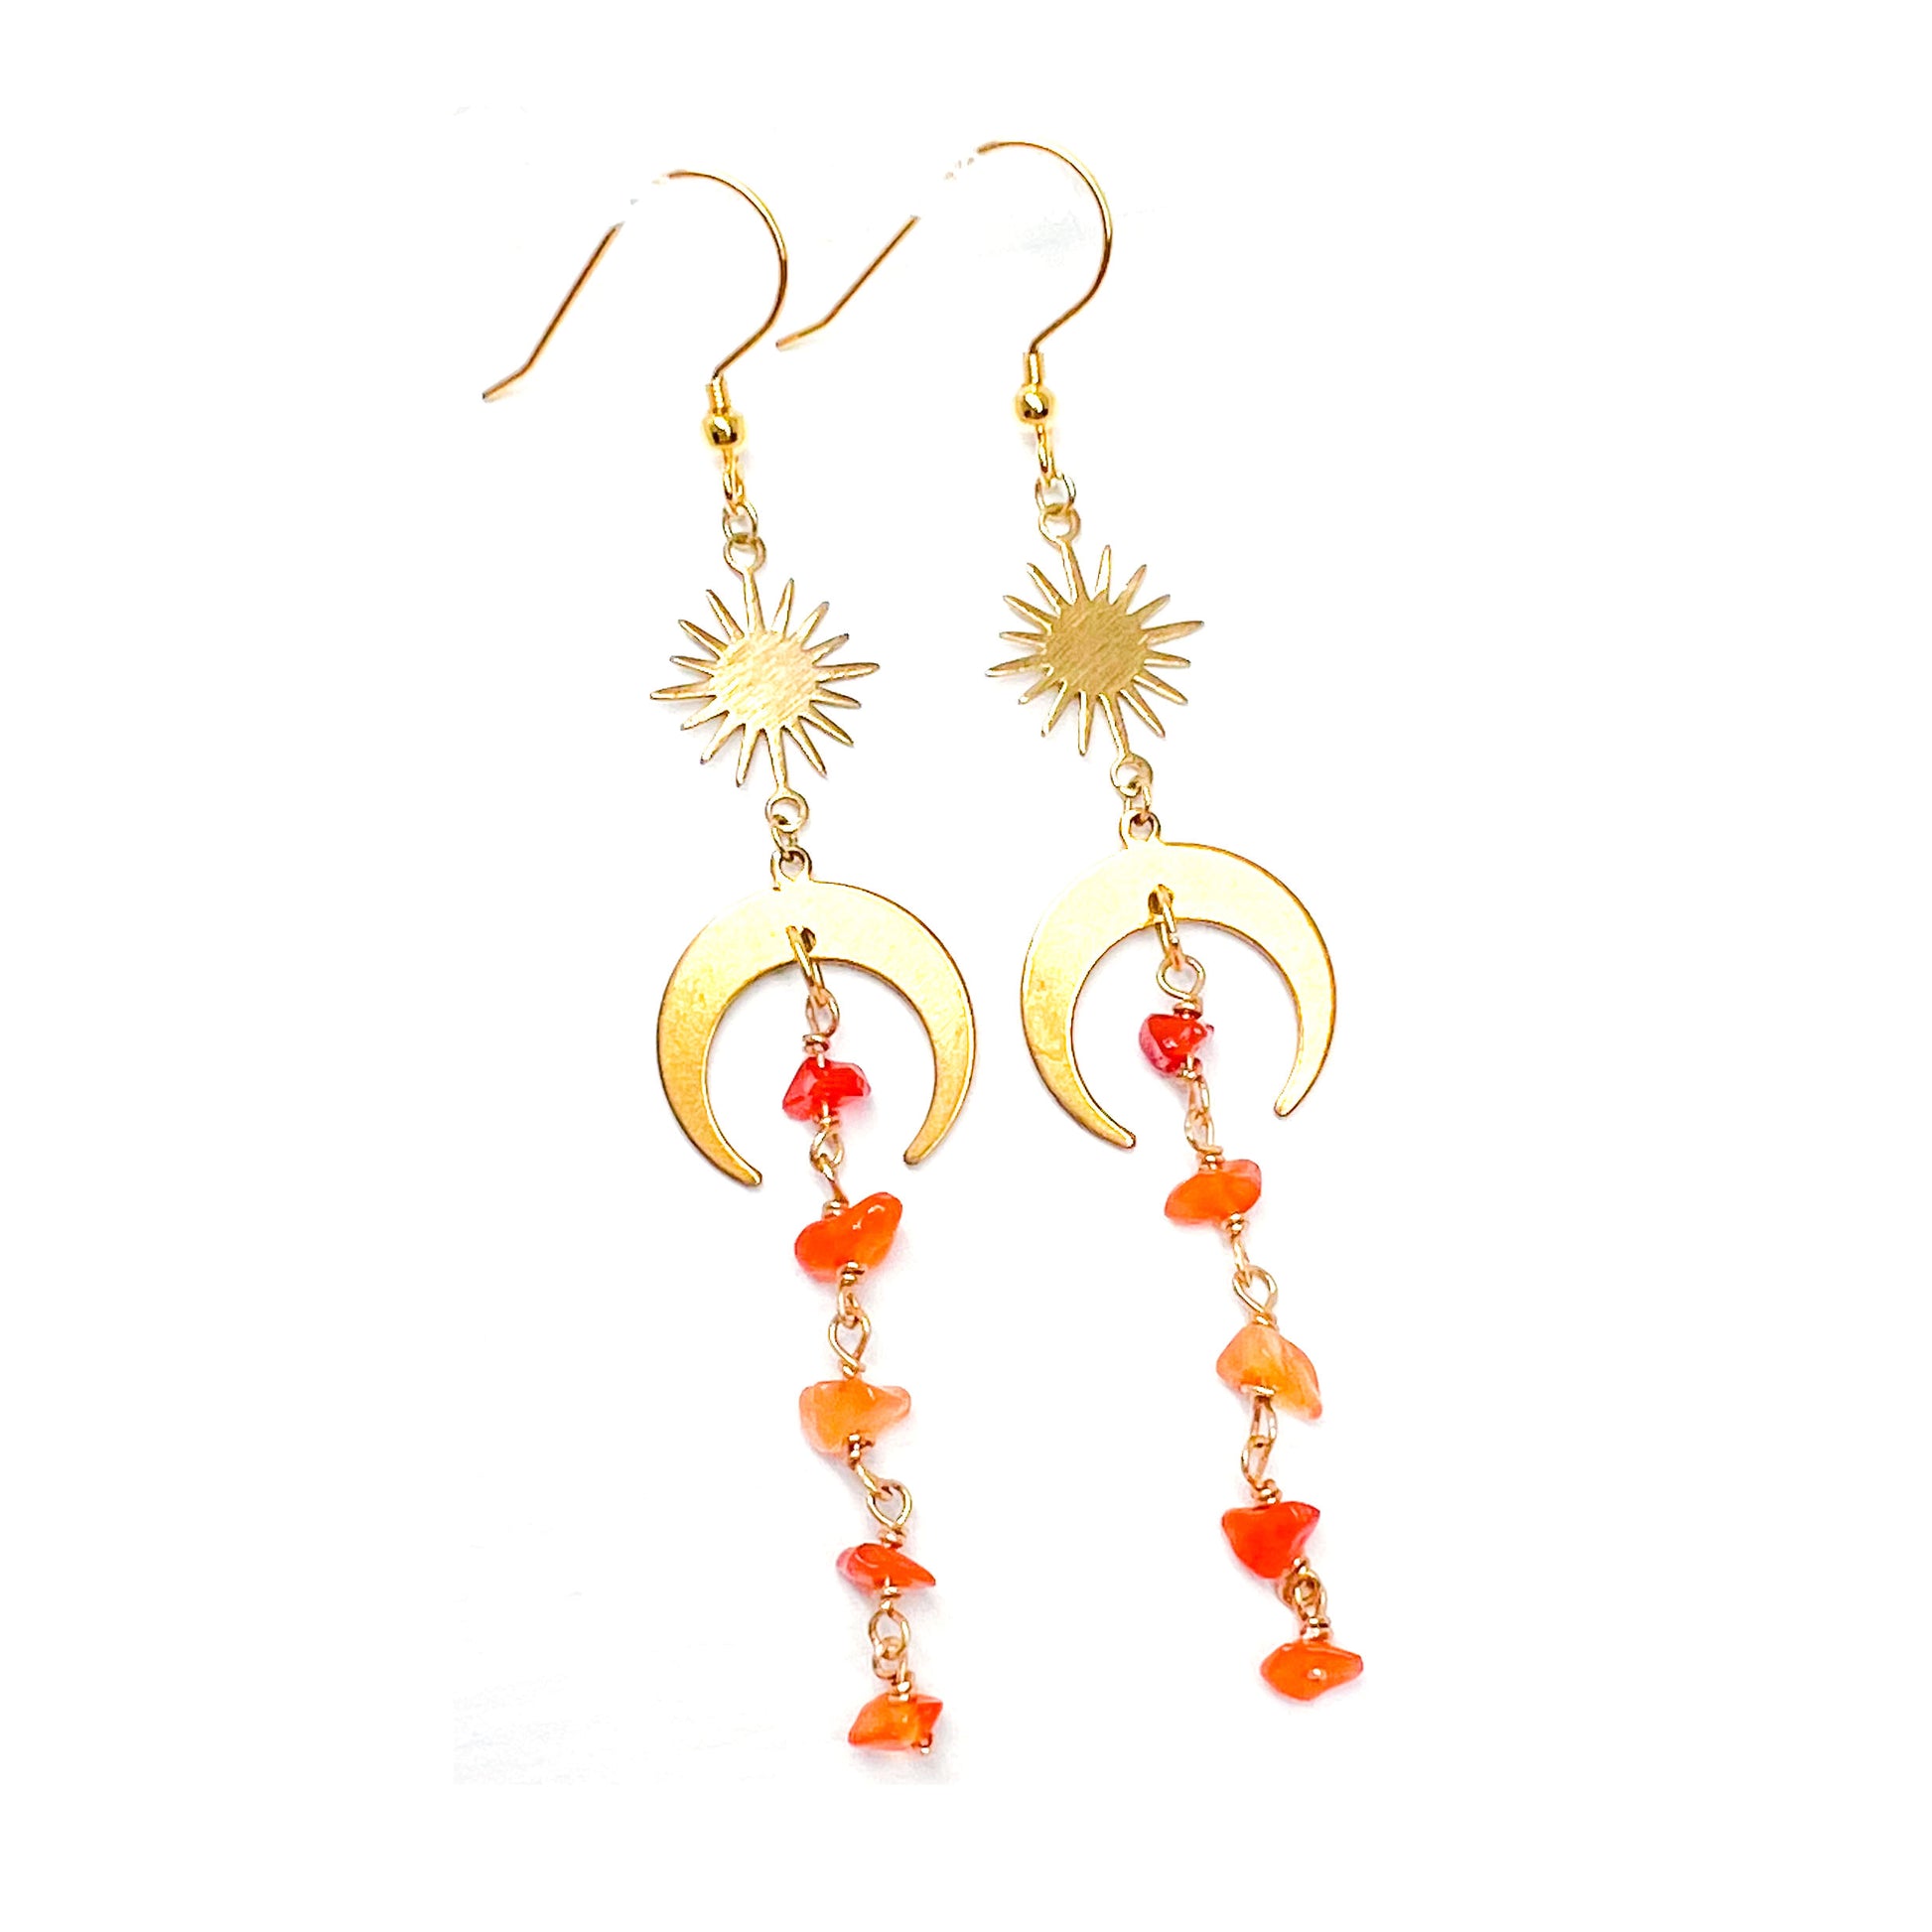 Gold carnelian gemstone earrings for energy and motivation